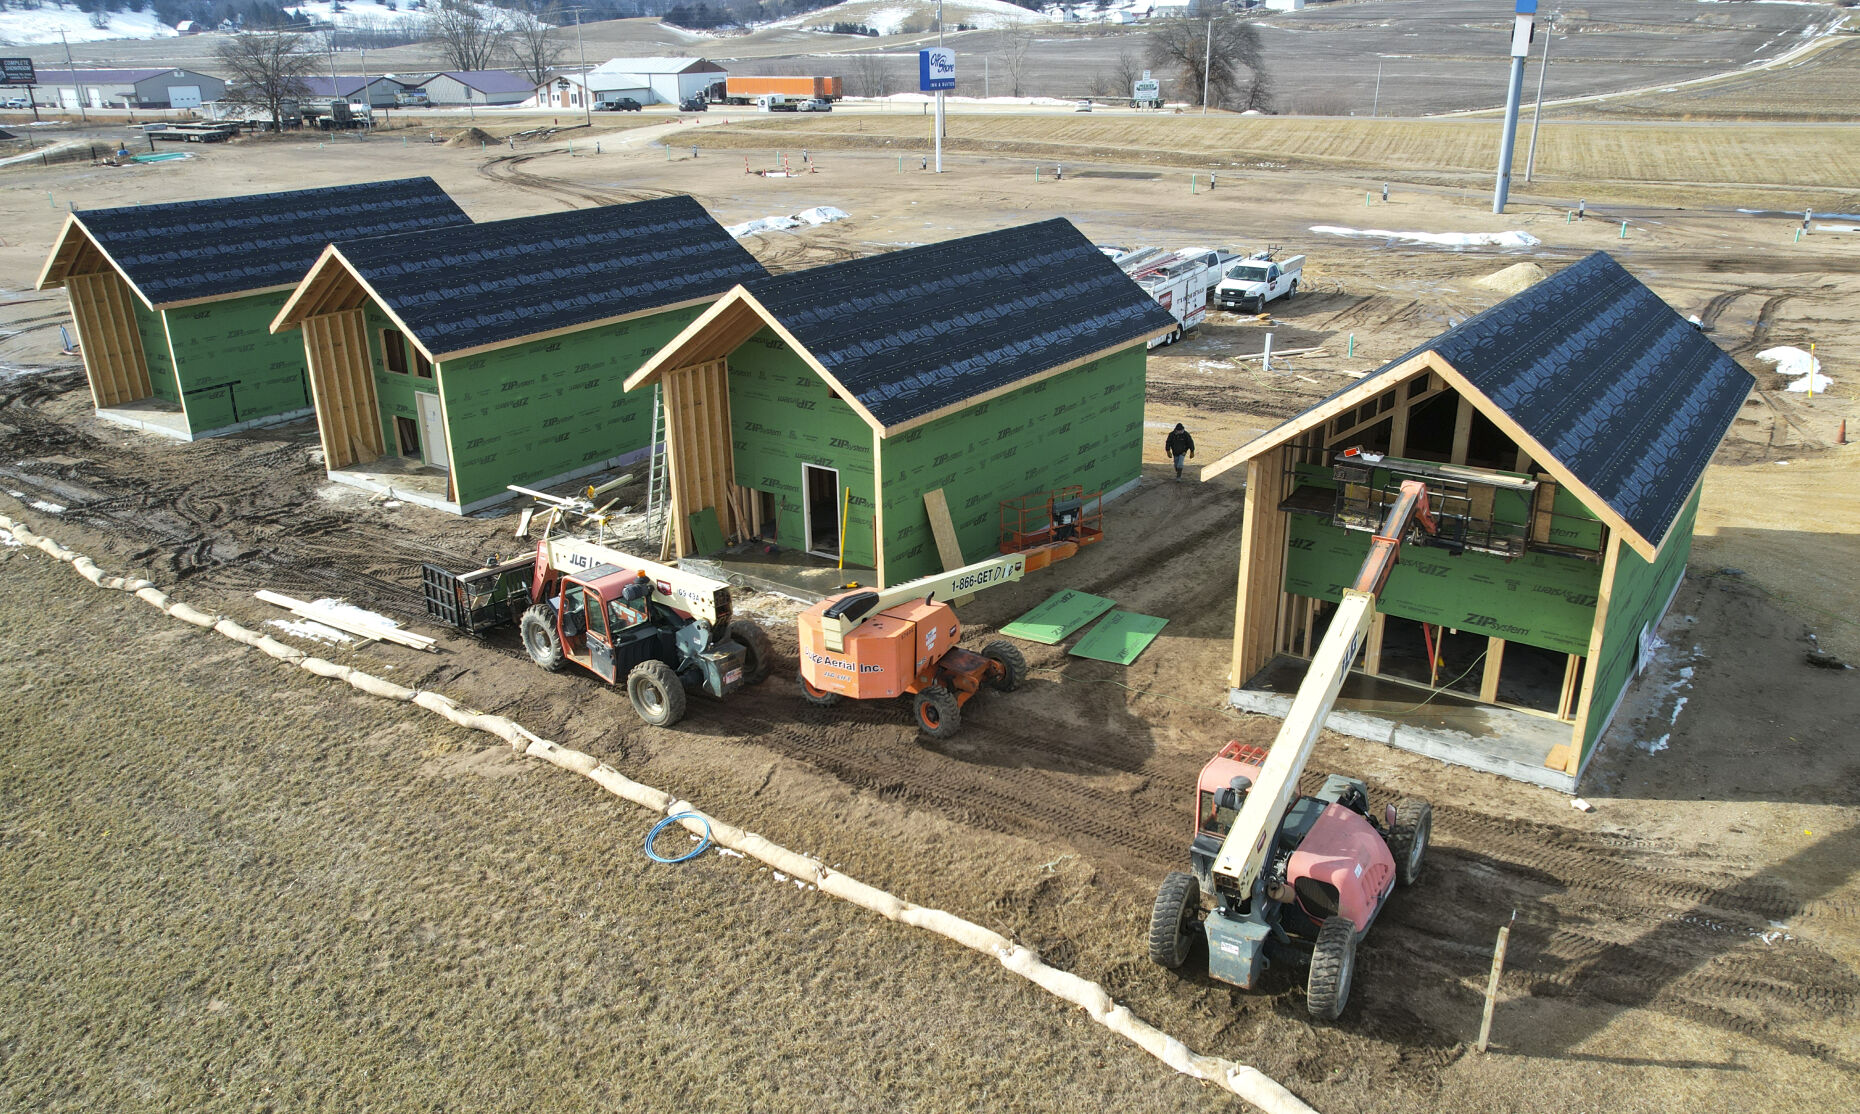 Construction crews work on building four villas at the Off Shore Resort in Bellevue, Iowa on Wednesday, Feb. 8, 2023.    PHOTO CREDIT: Dave Kettering